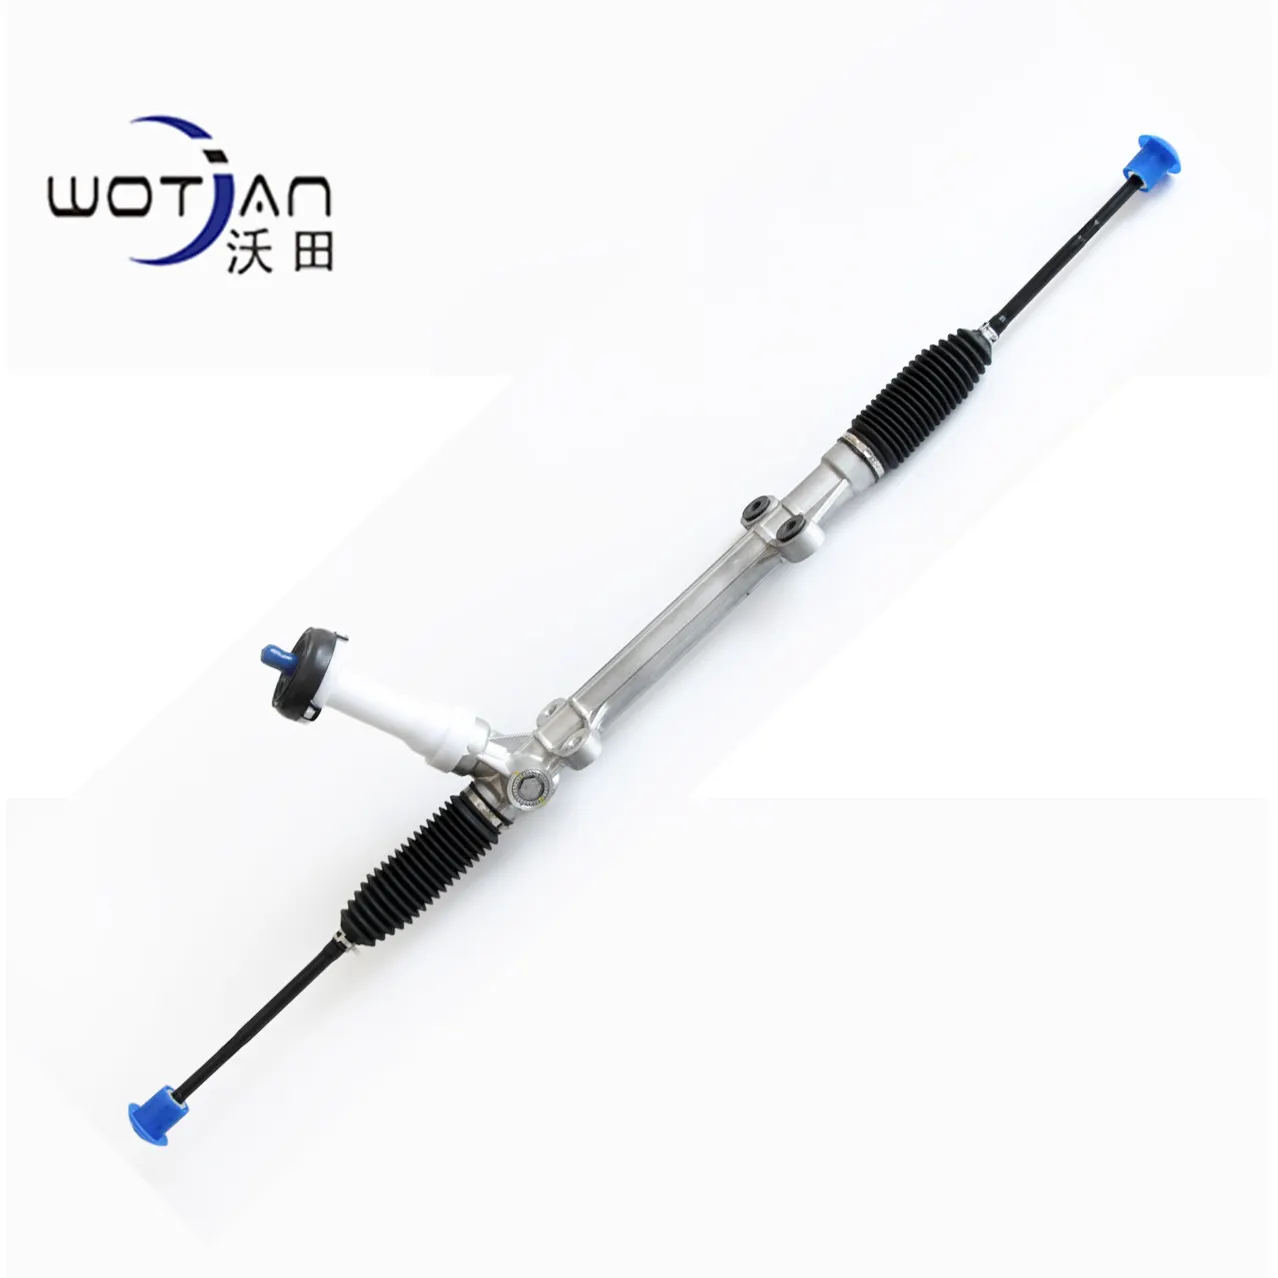 LHD Auto power system car parts Steering Rack and pinion For Changan CS35 oem no. S101056-0100 EPS gear